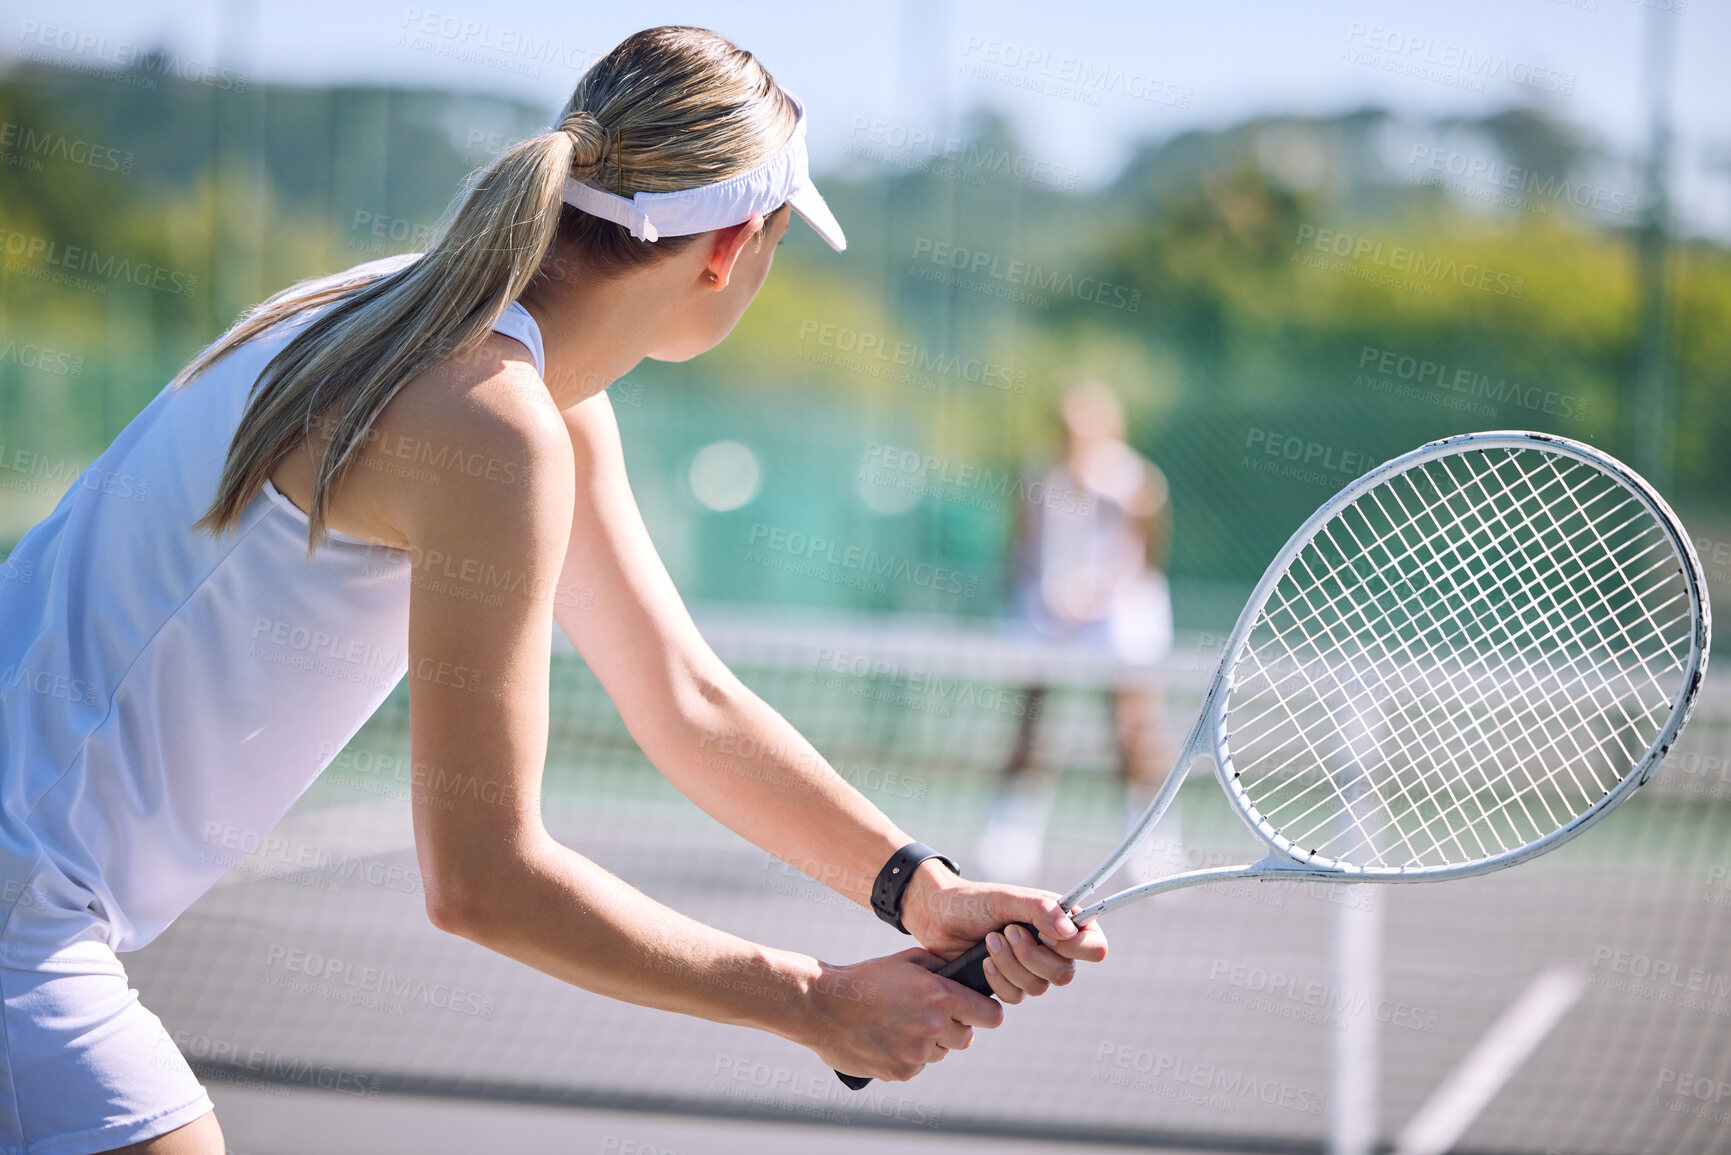 Buy stock photo Active female tennis player back in motion holding racket, playing game match on outdoor sports court. Professional athlete training for sporty summer fun or fitness, health and wellness lifestyle.